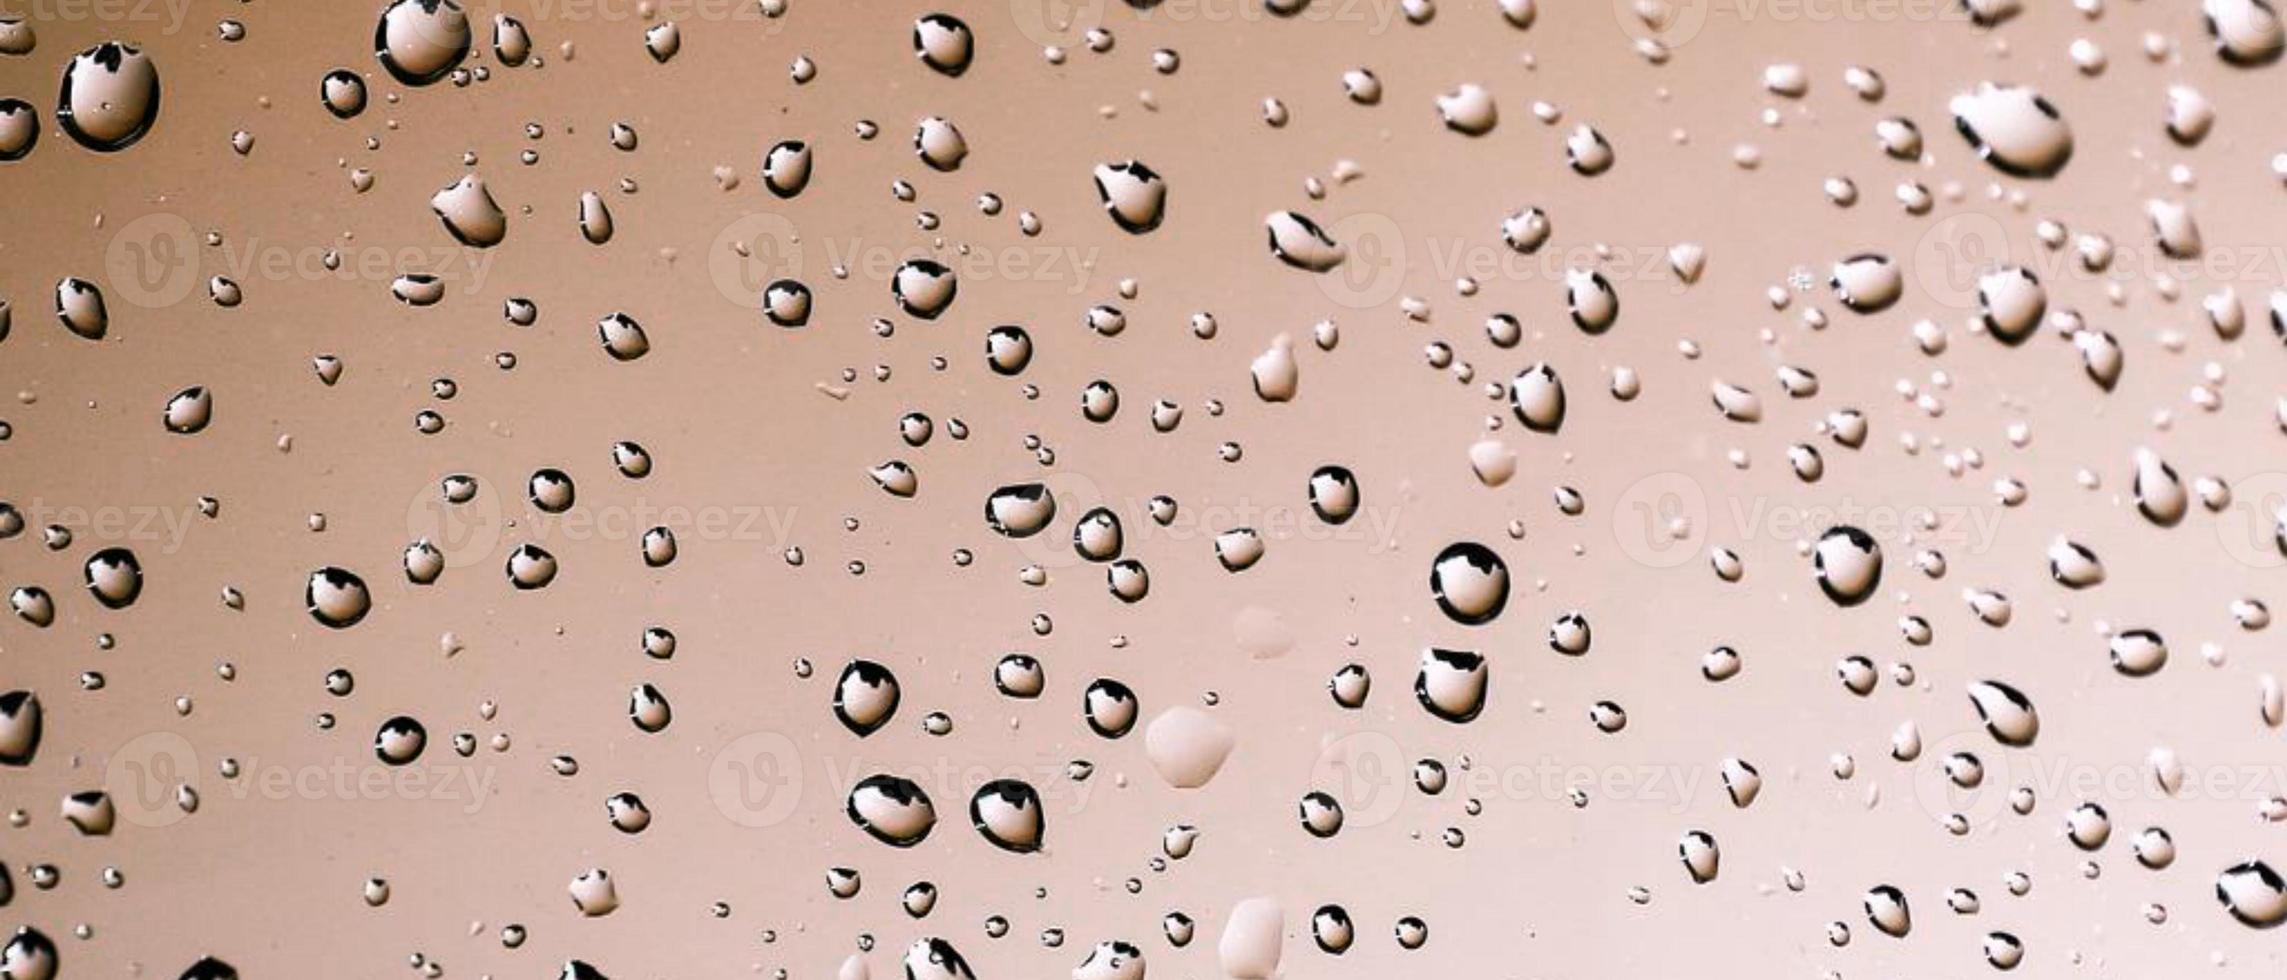 Water droplets on a glass surface photo - Champagne